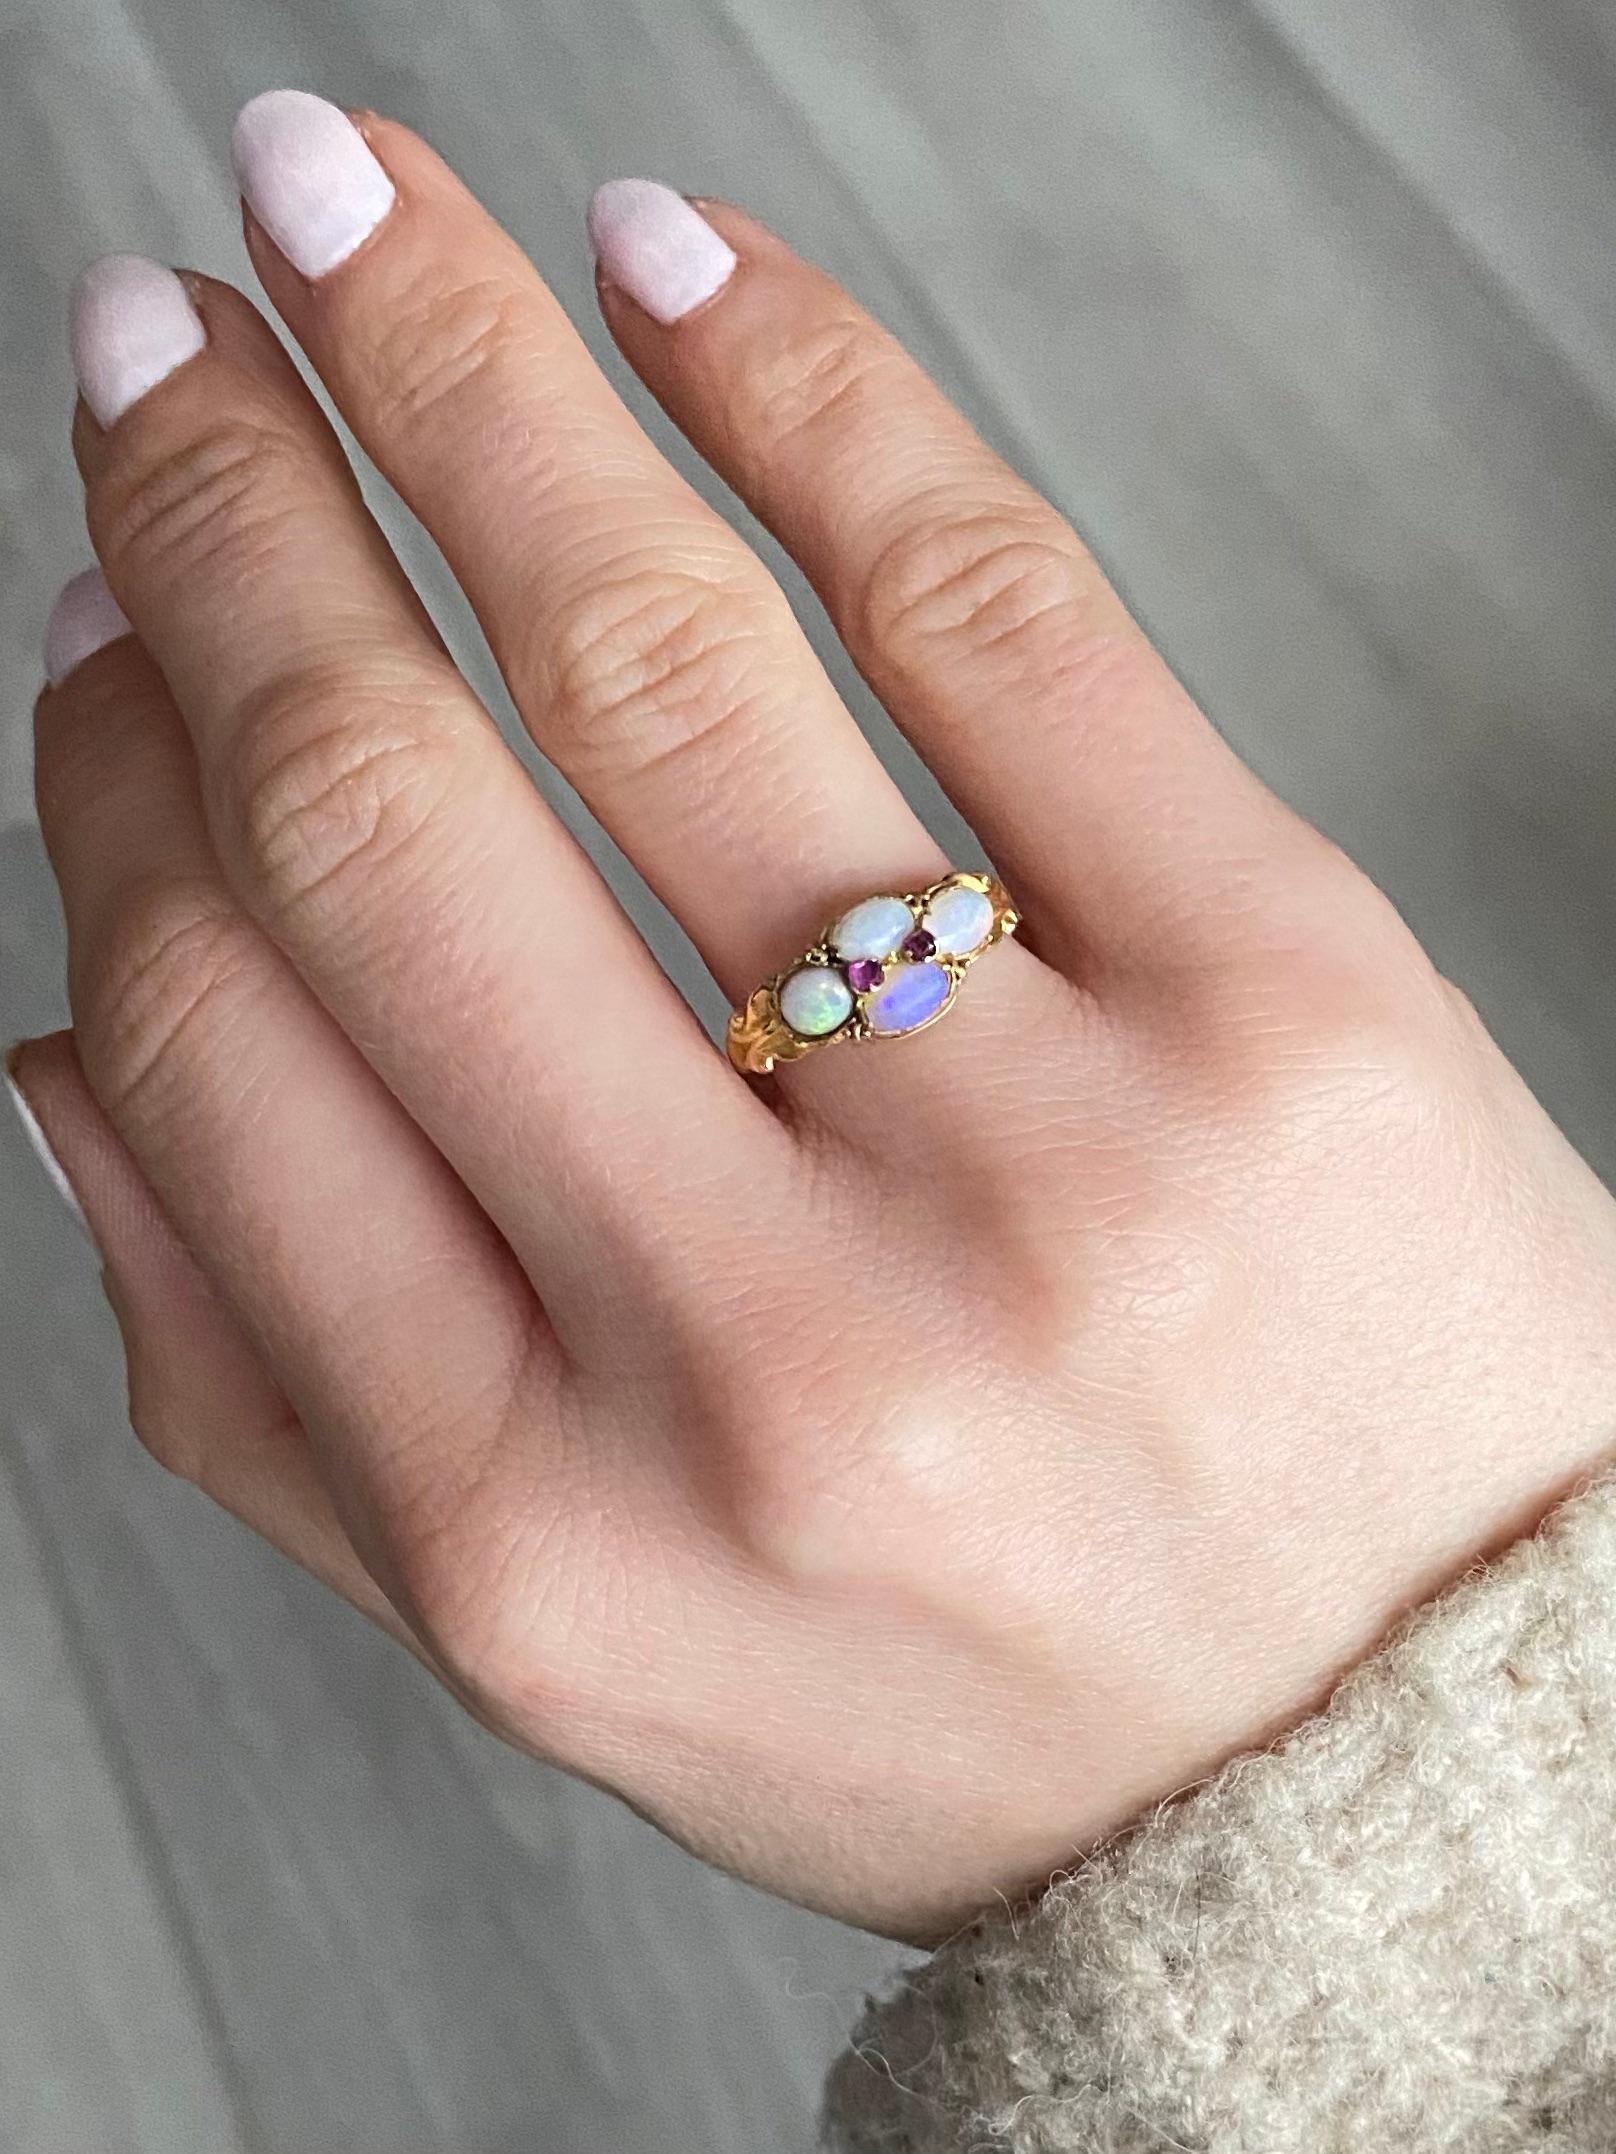 Cabochon Victorian Opal and Amethyst 15 Carat Gold Ring